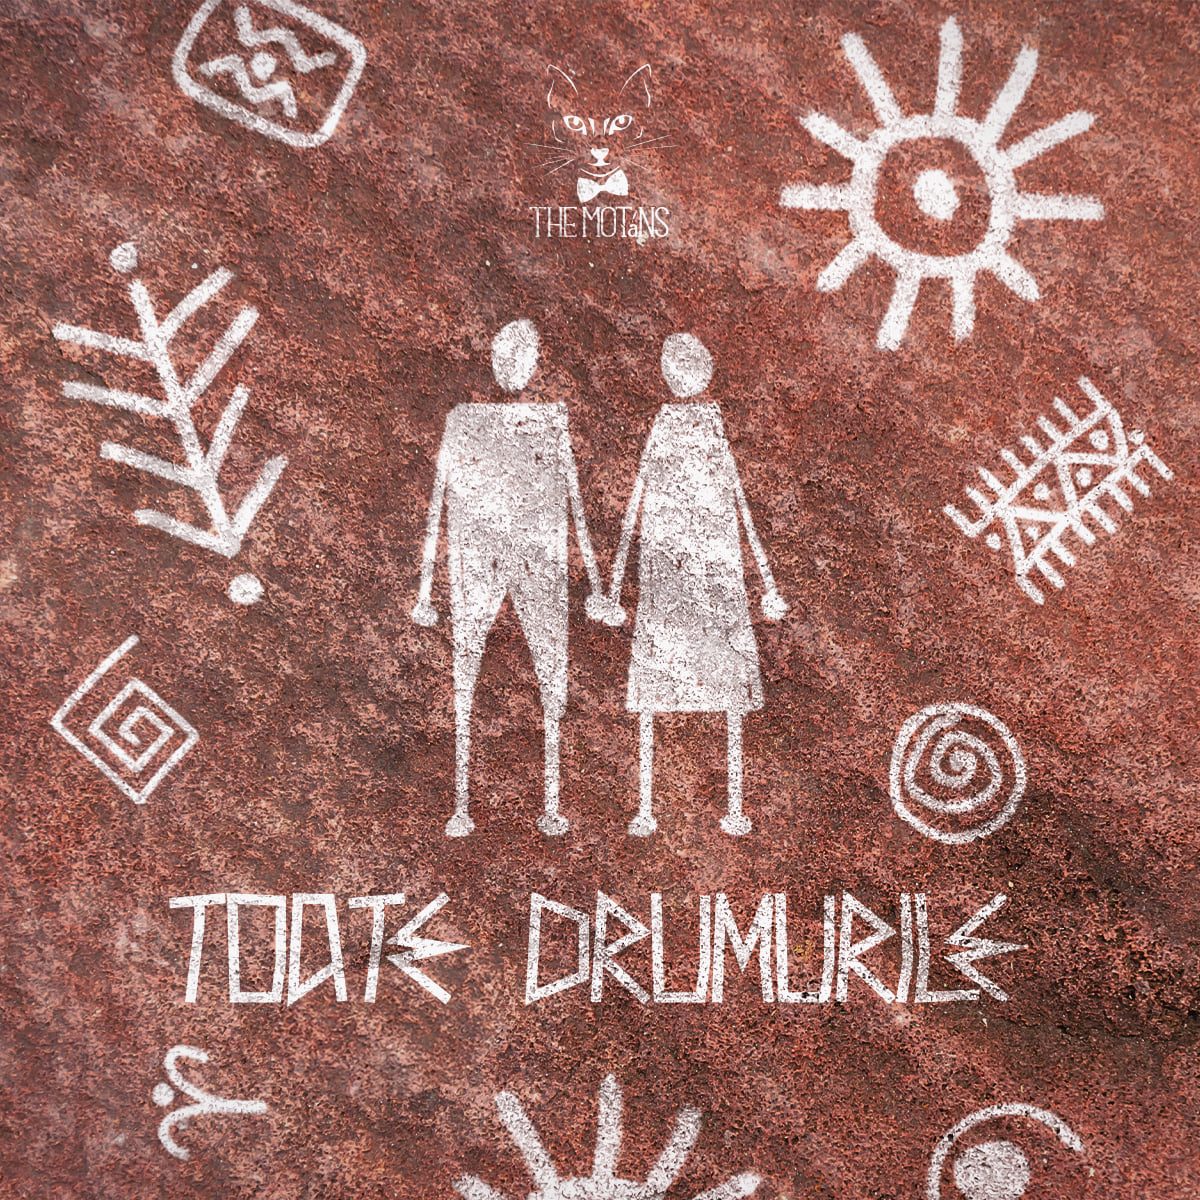 toate drumurile -the motans